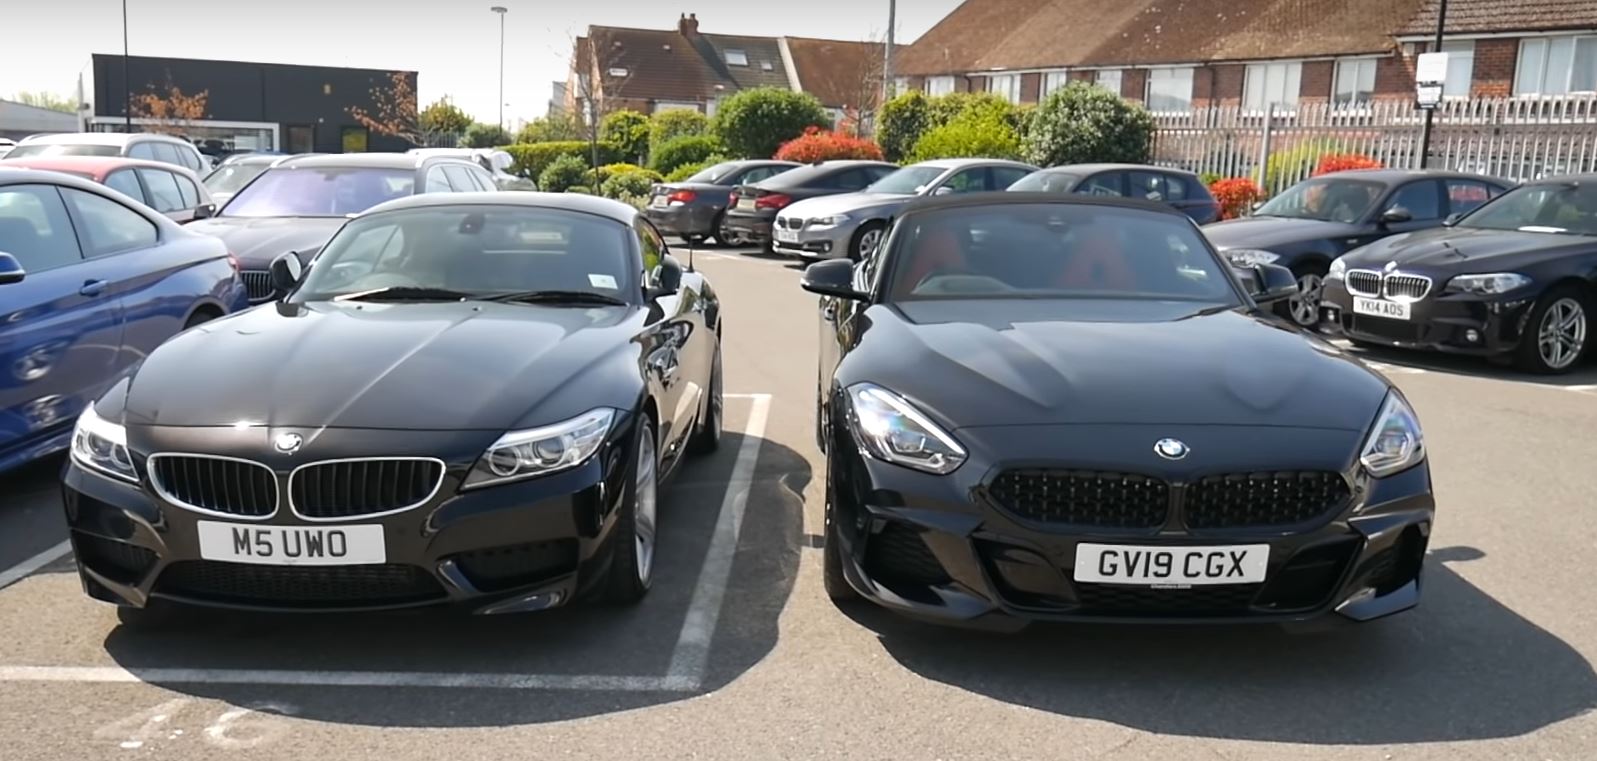 Name:  new-g29-bmw-z4-compared-to-old-e89-z4-by-owner-generation-gap-is-real-135940_1.jpg
Views: 3412
Size:  170.9 KB